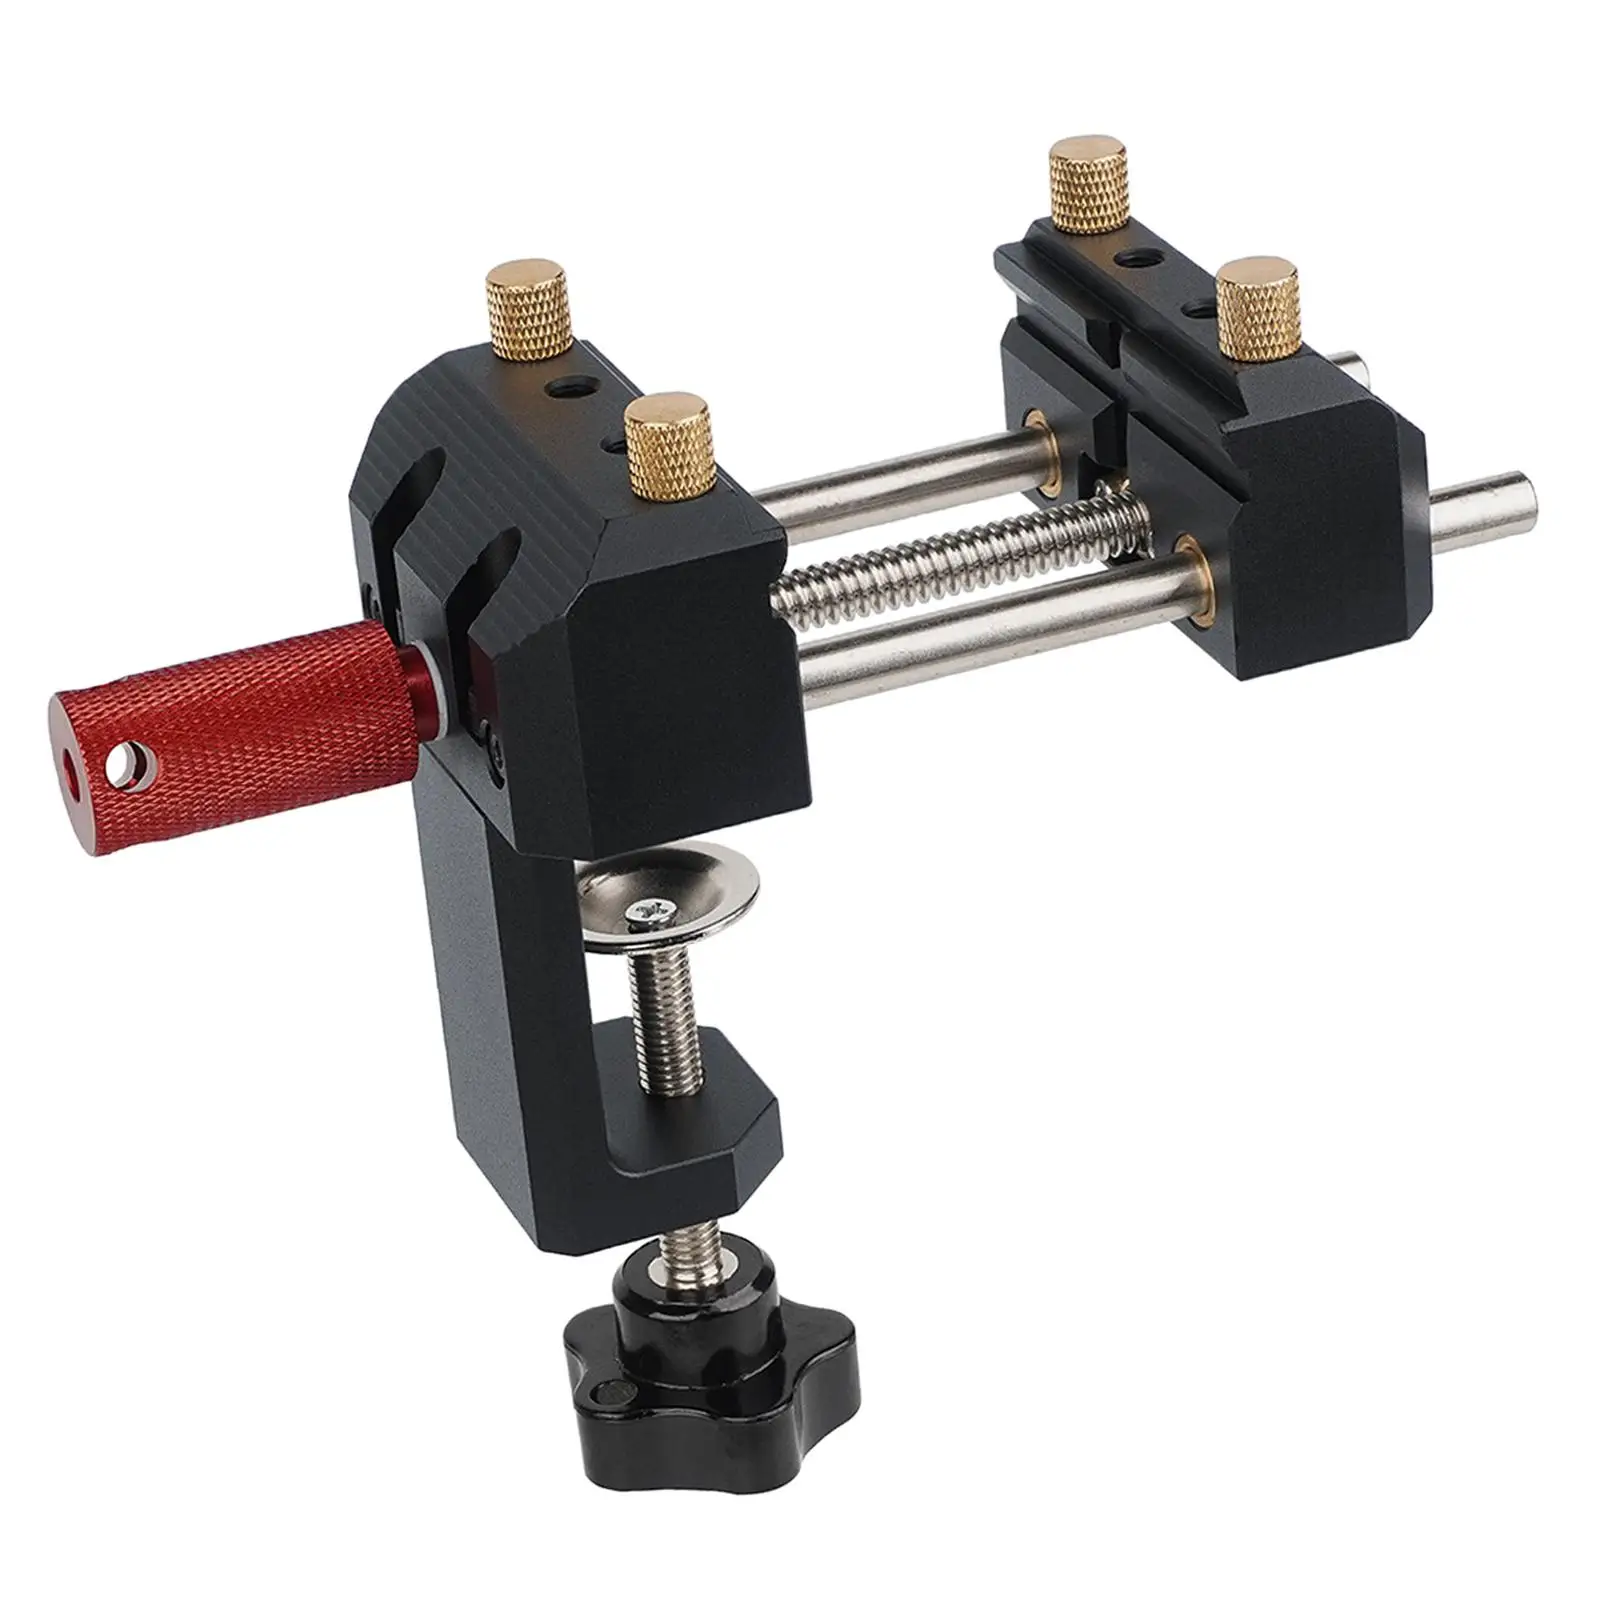 Universal Table Bench Vice Clamp Fixing Tool Accessories Woodworking Clamps for Jewelry Making Carving Metalworking Grinding